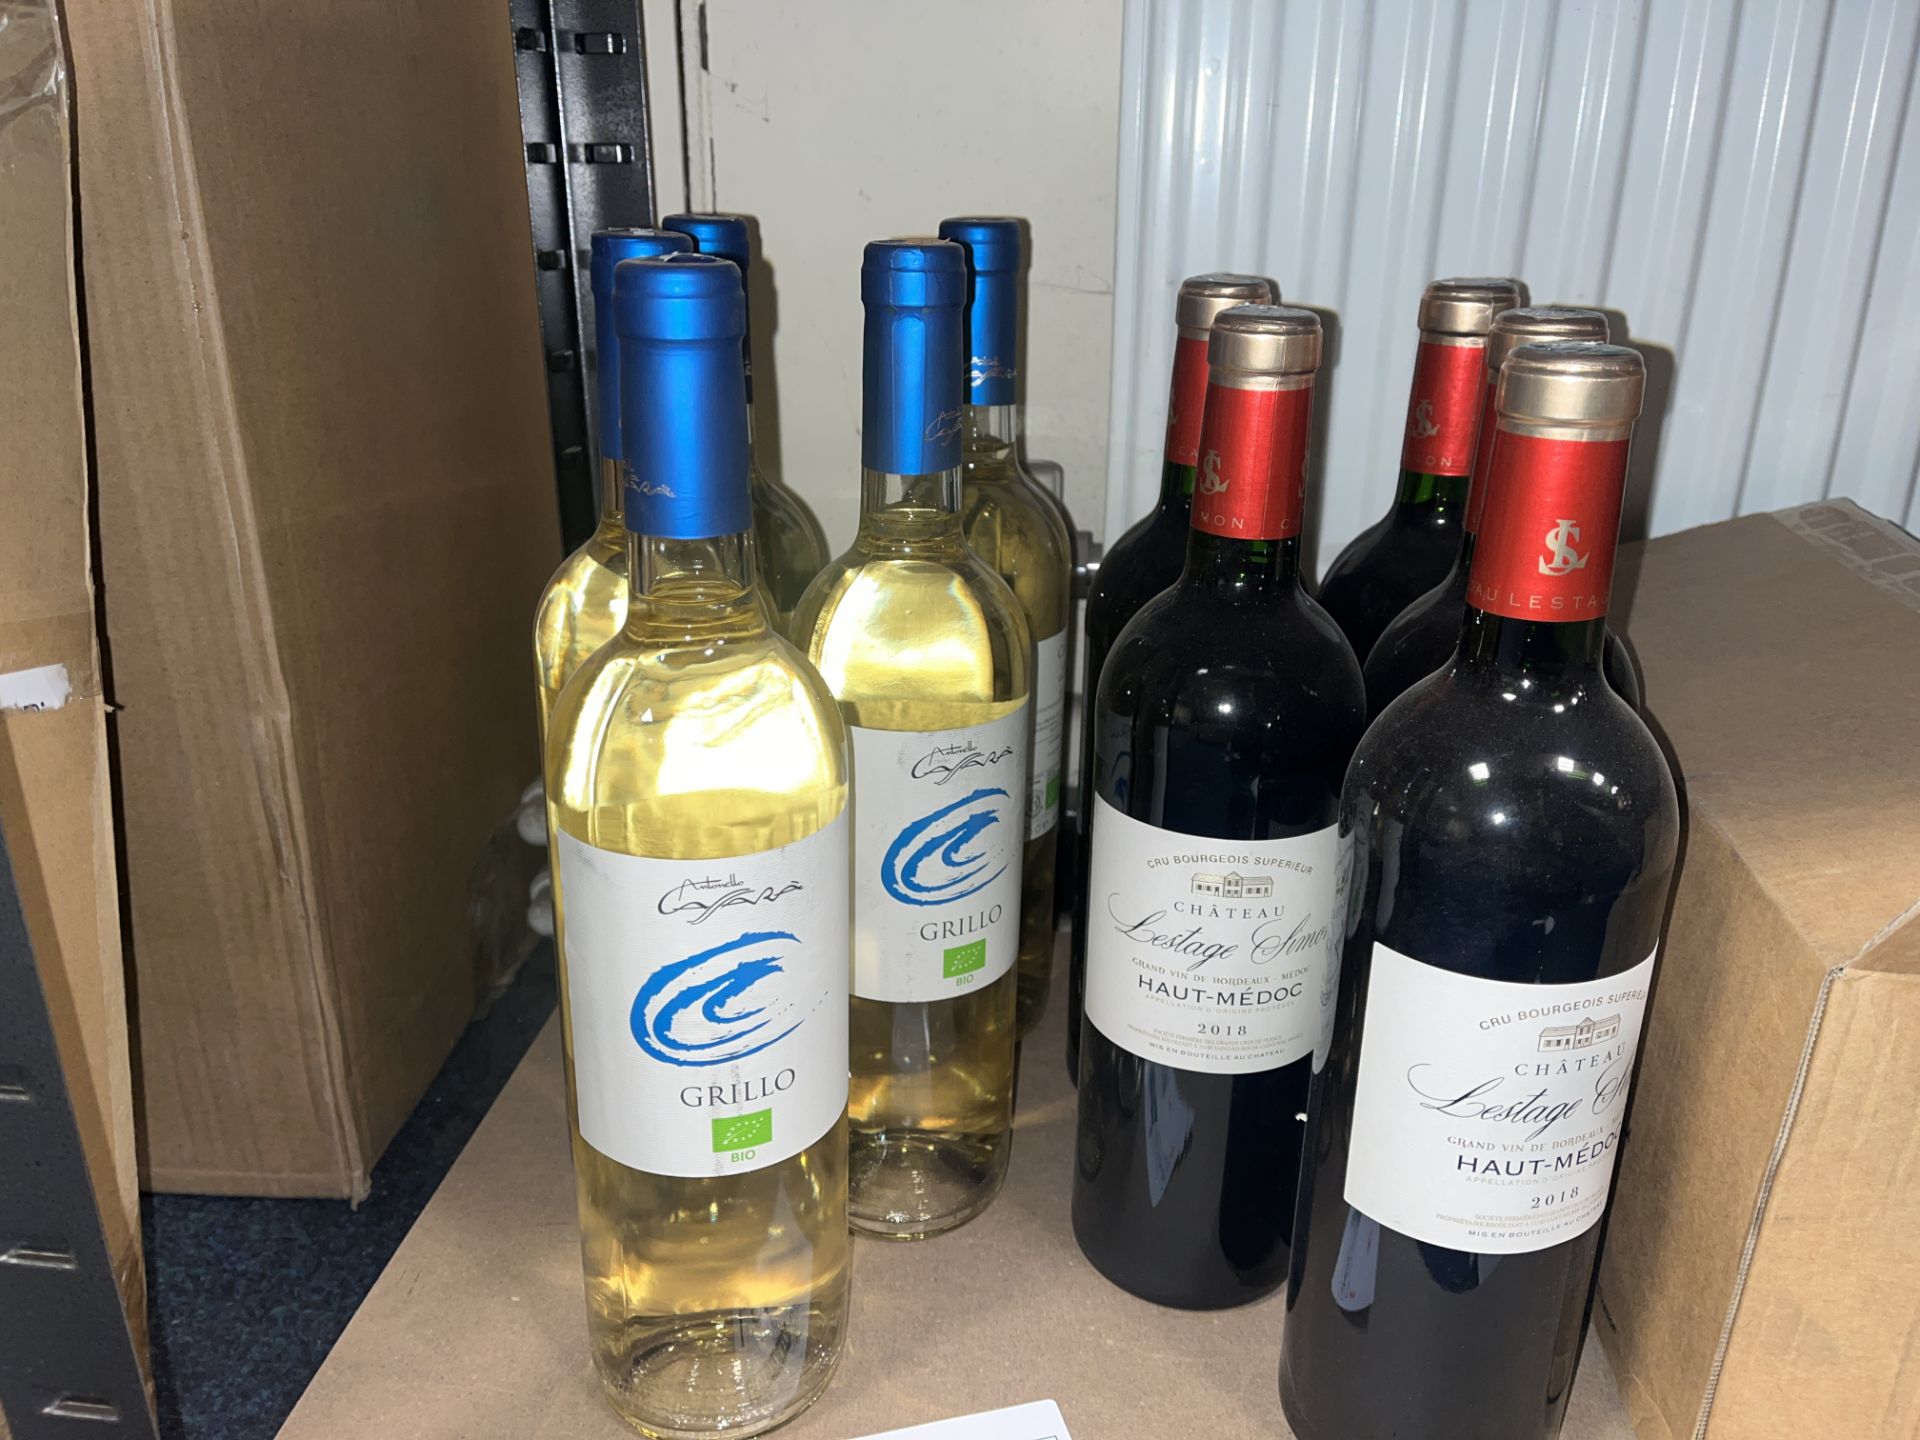 10 X BRAND ENW BOTTLES OF WINE INCLUDING CHATEAU BESTAGE LIMON 2018 AND GRILLO EBR